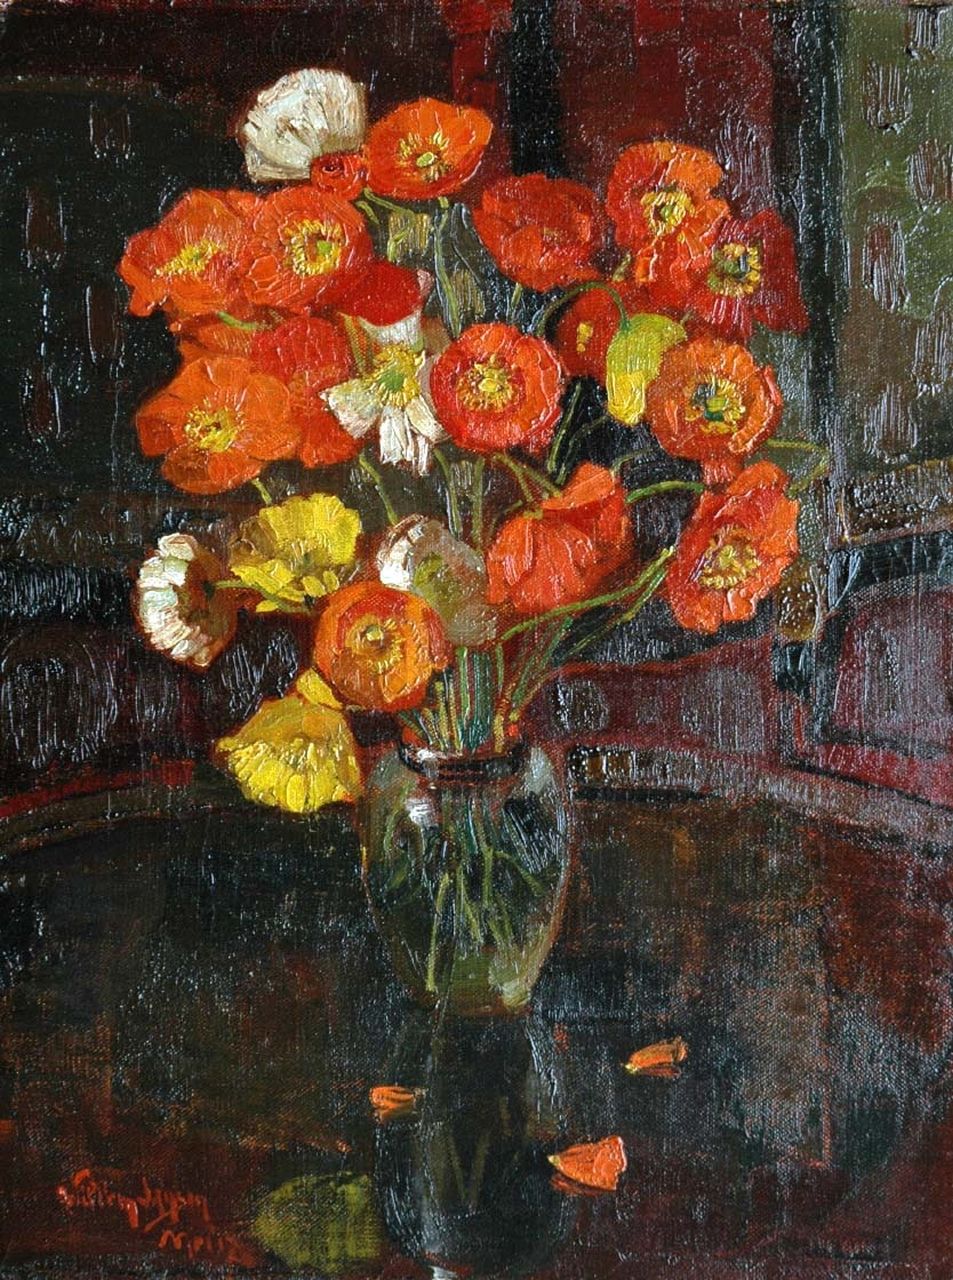 Willem Jansen | A still life with poppies, oil on canvas, 44.7 x 34.5 cm, signed l.l. and painted in May '17